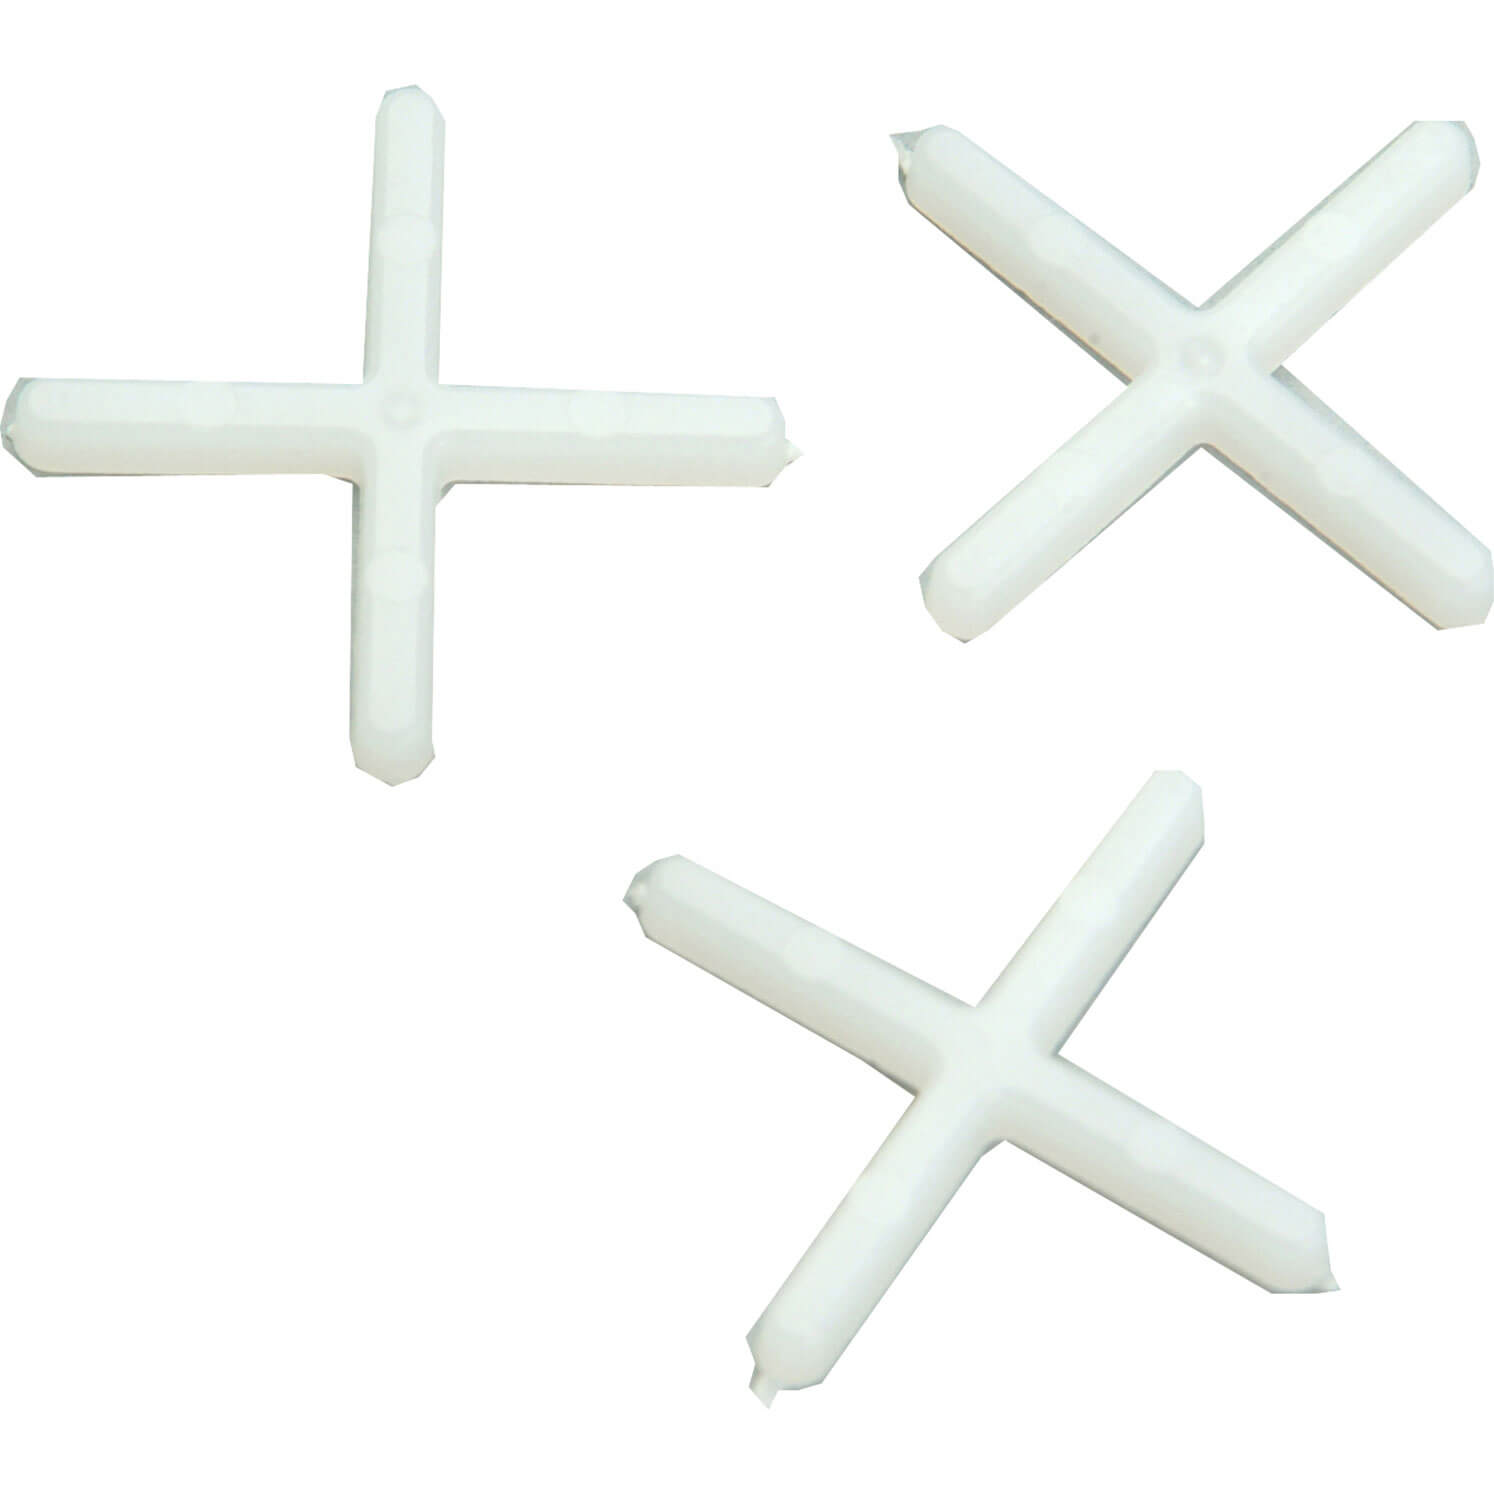 Photo of Vitrex Plastic Wall Tile Spacers 2.5mm Pack Of 500